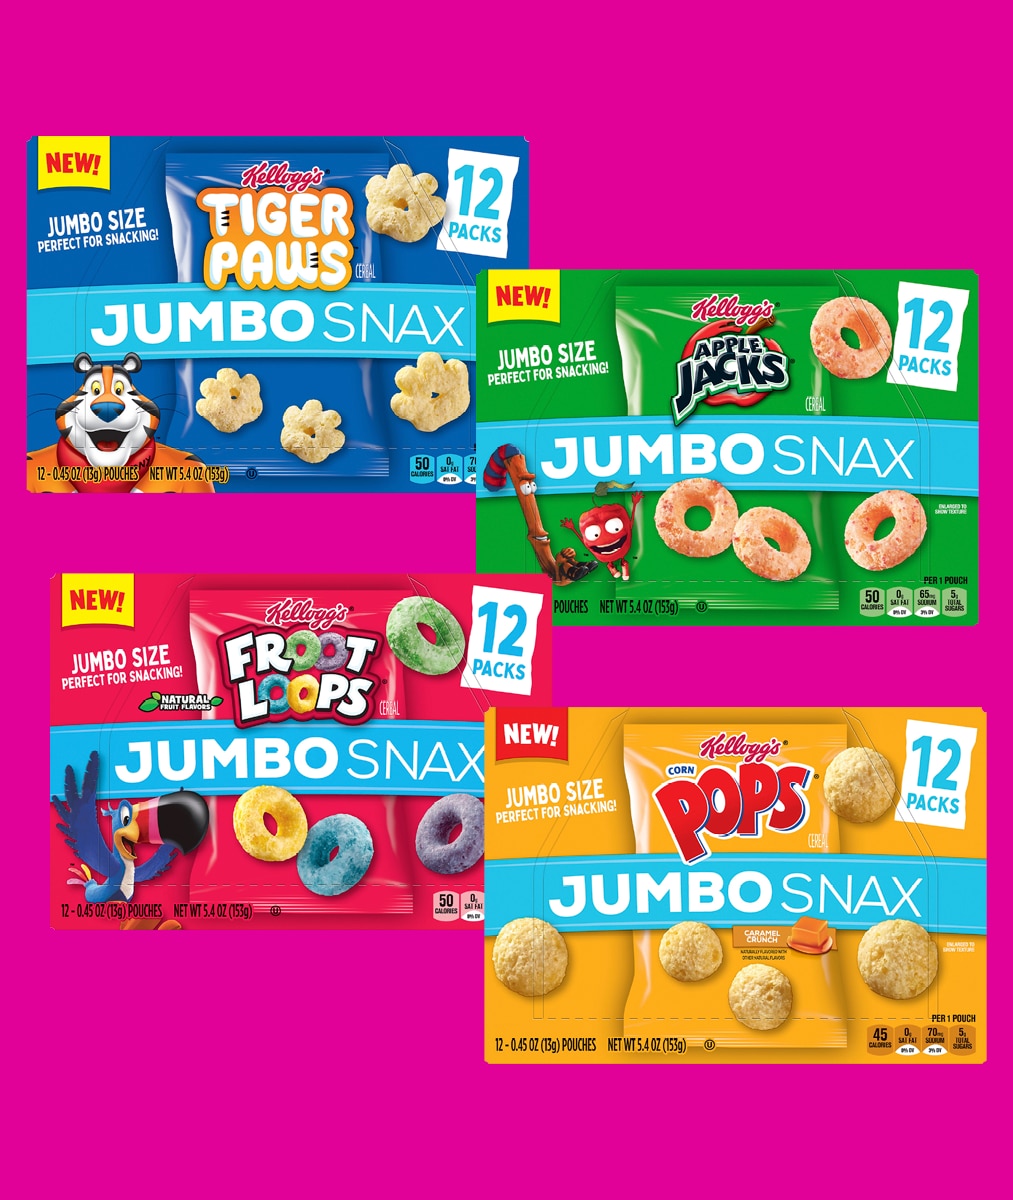 Your favorite cereals, jumbo sized and perfect for snacking!